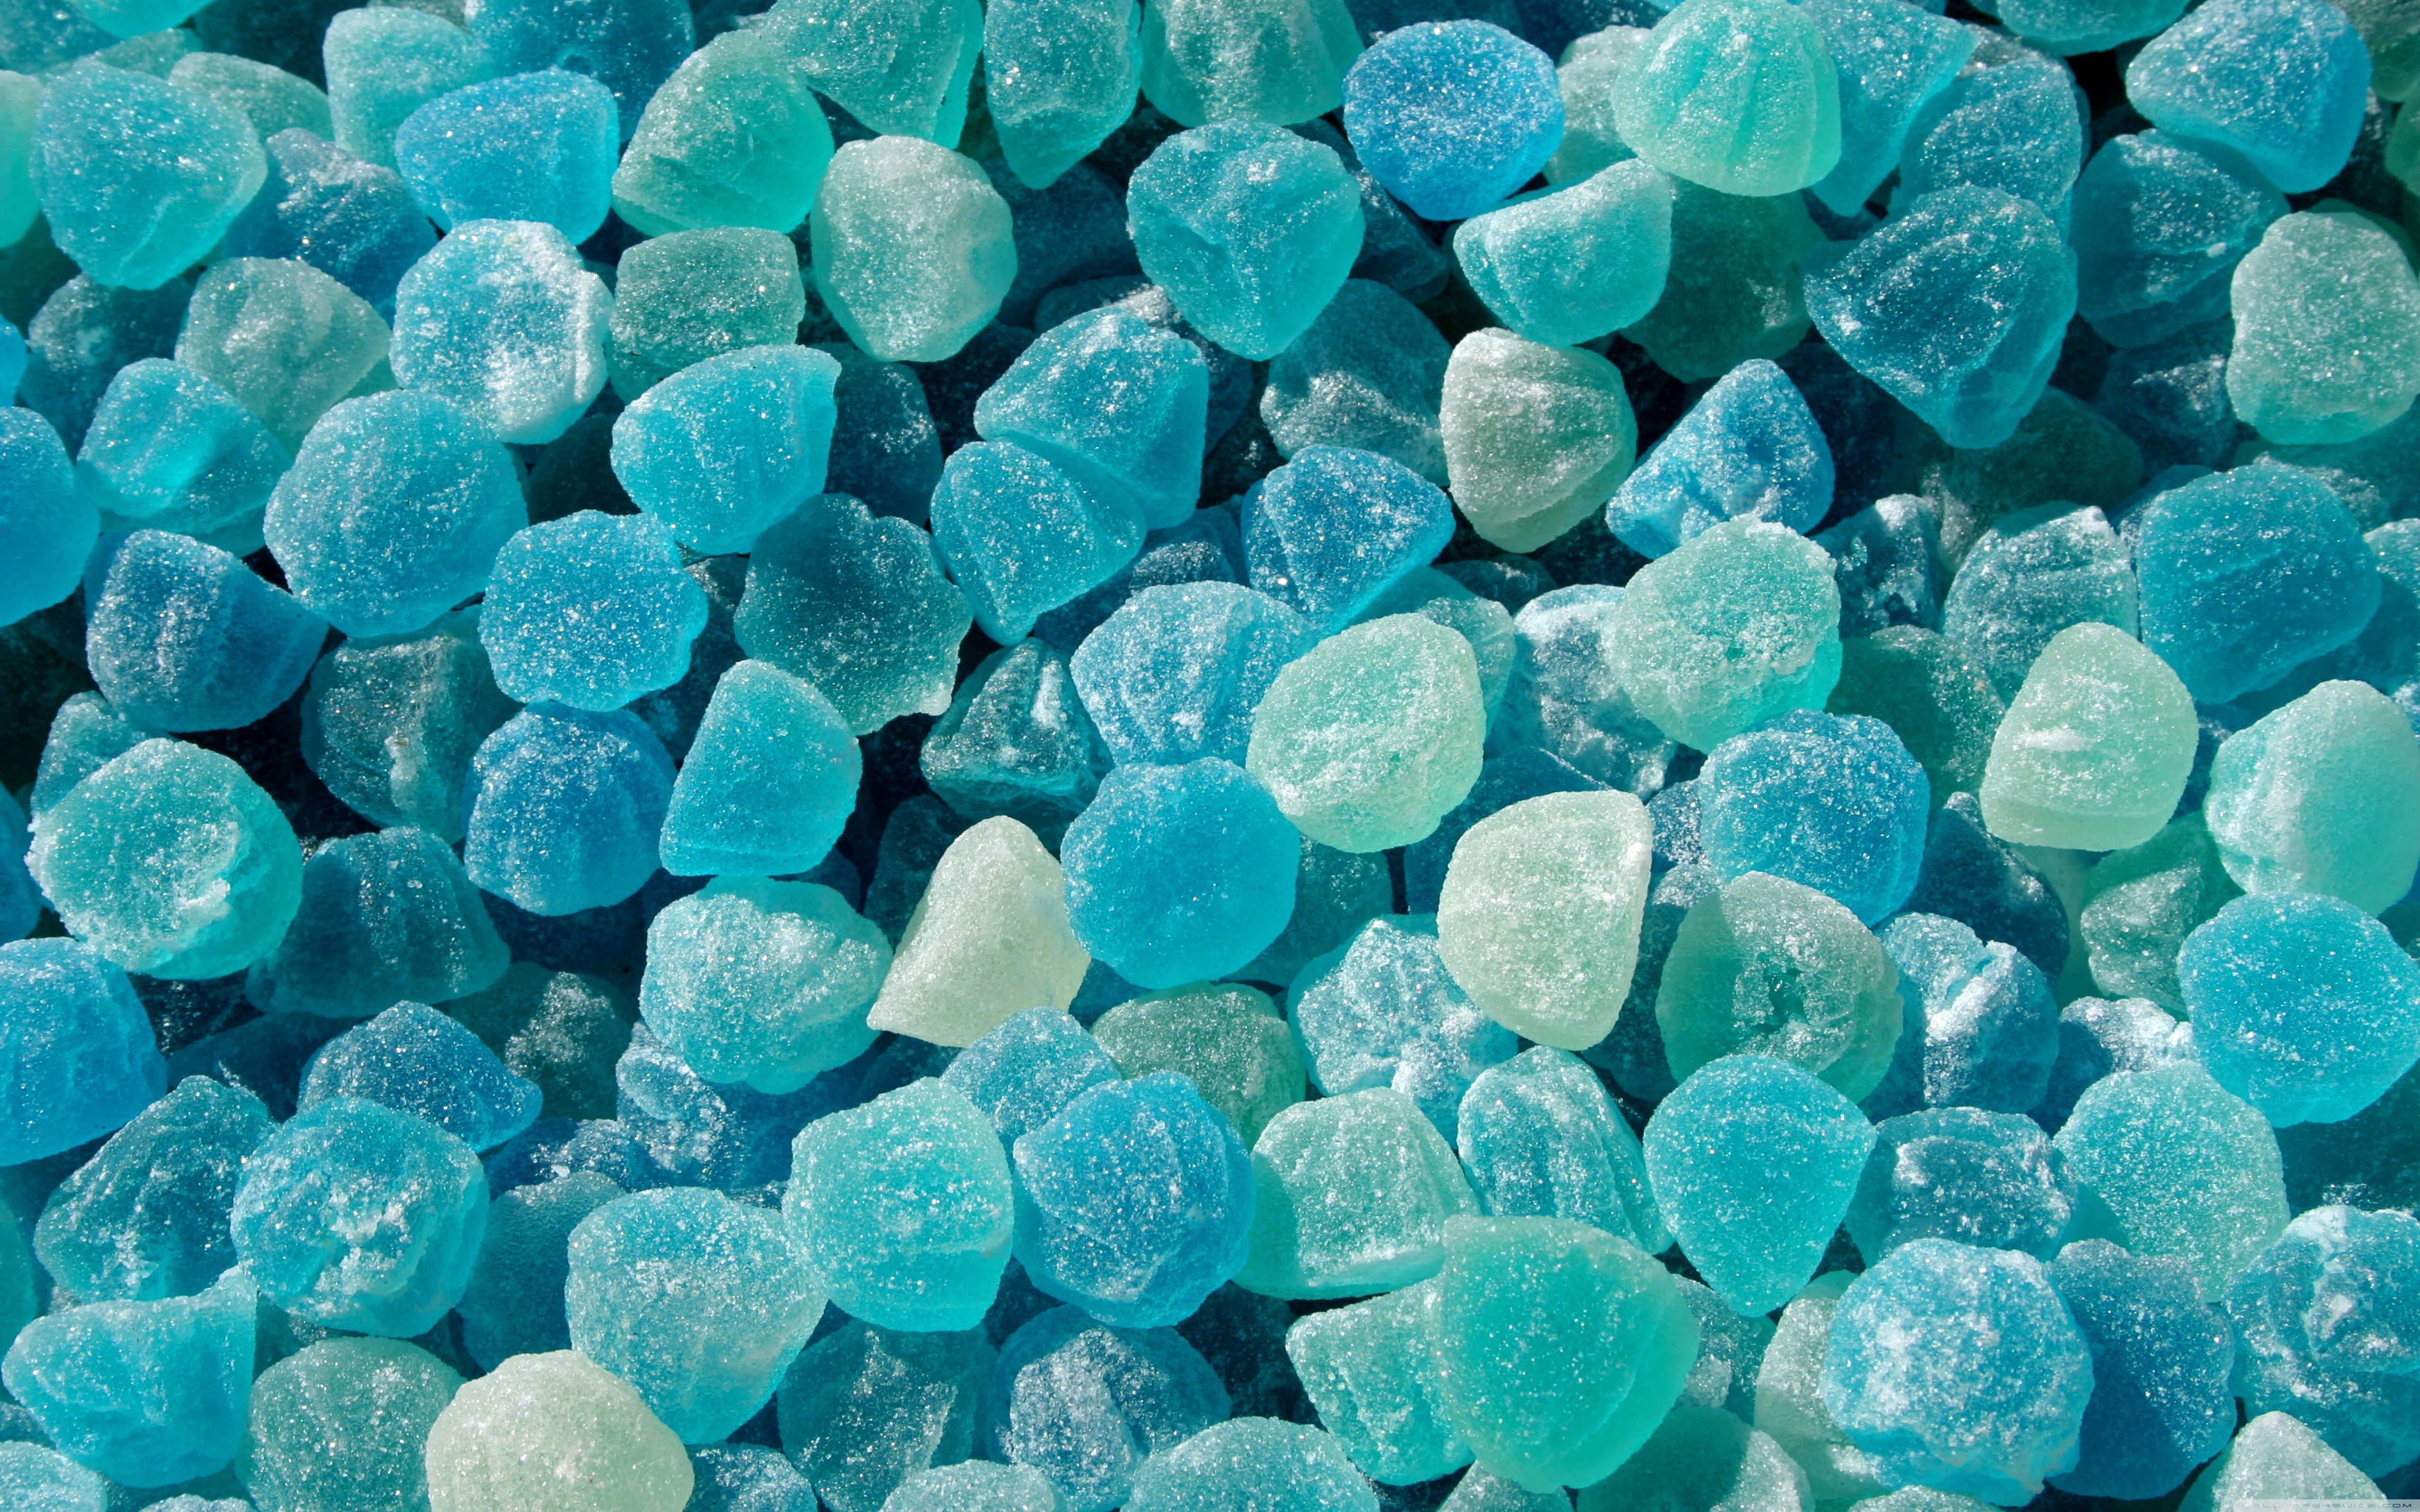 A close up of blue and green rocks - Food